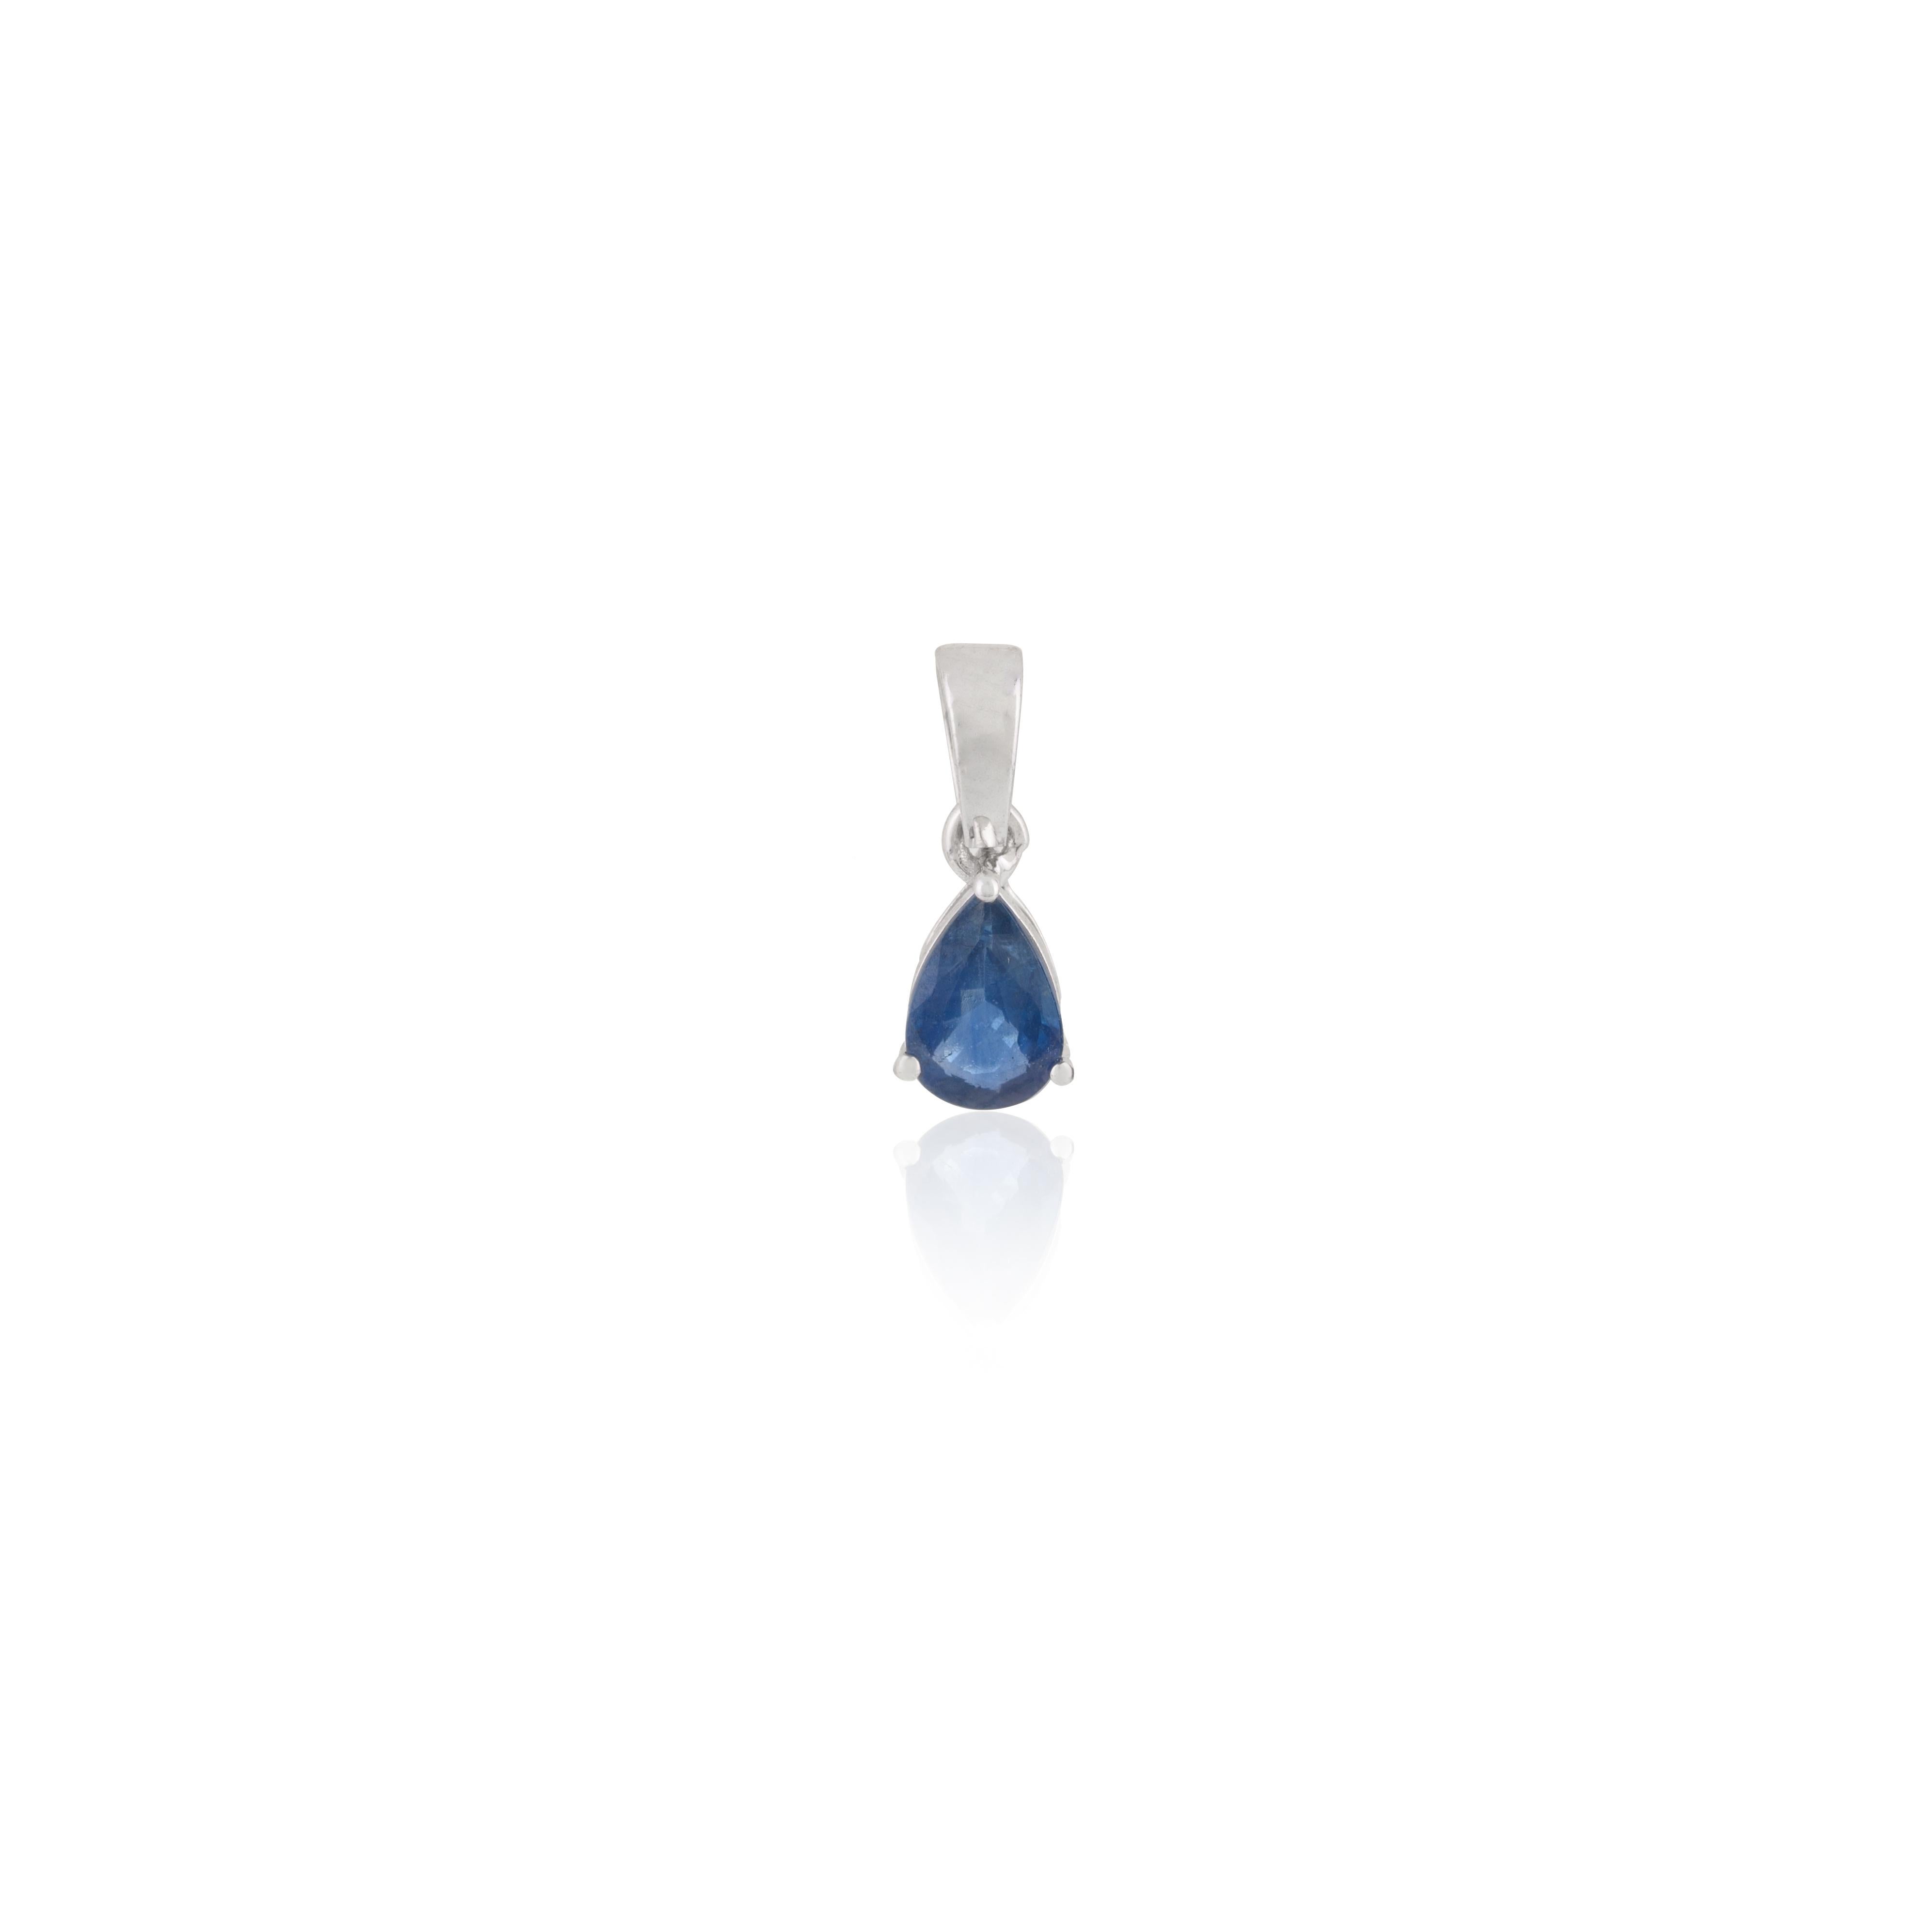 For Sale:  18k Solid White Gold Faceted Pear Cut Blue Sapphire Pendant and Ring Jewelry Set 14